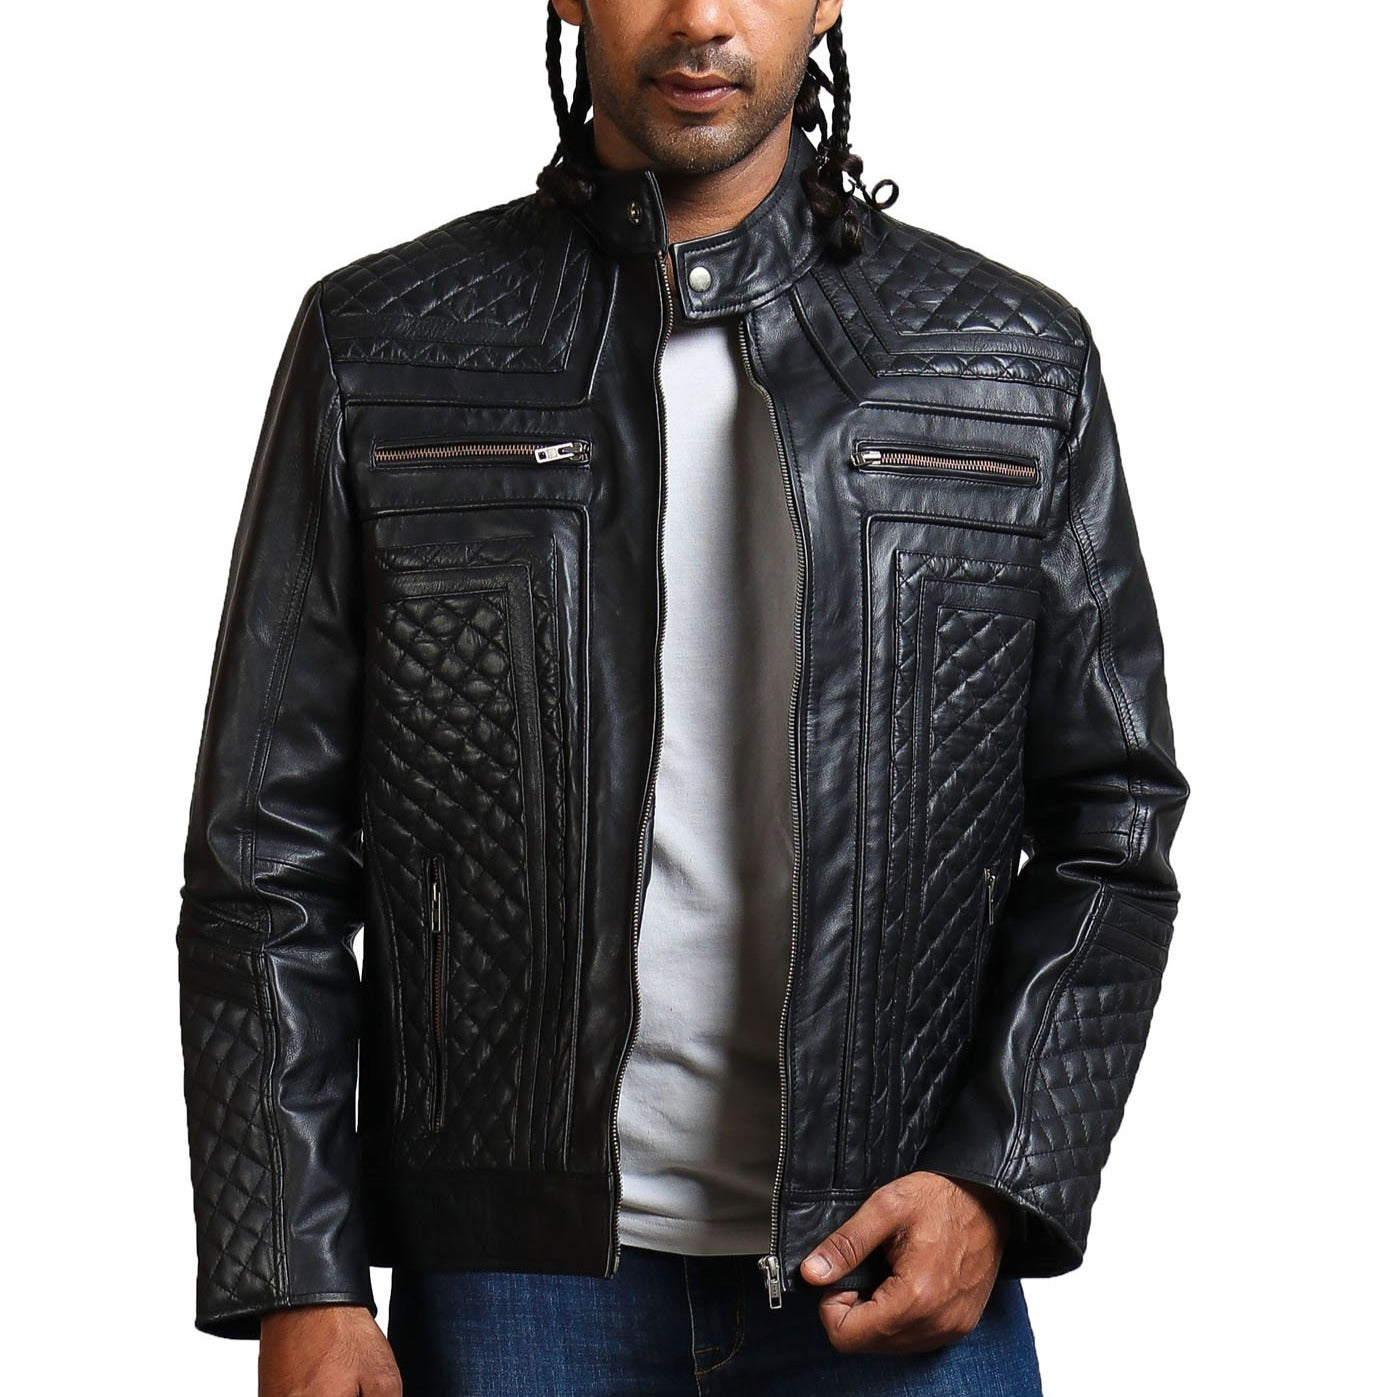 Men's Diamond Quilted Black Leather Jacket